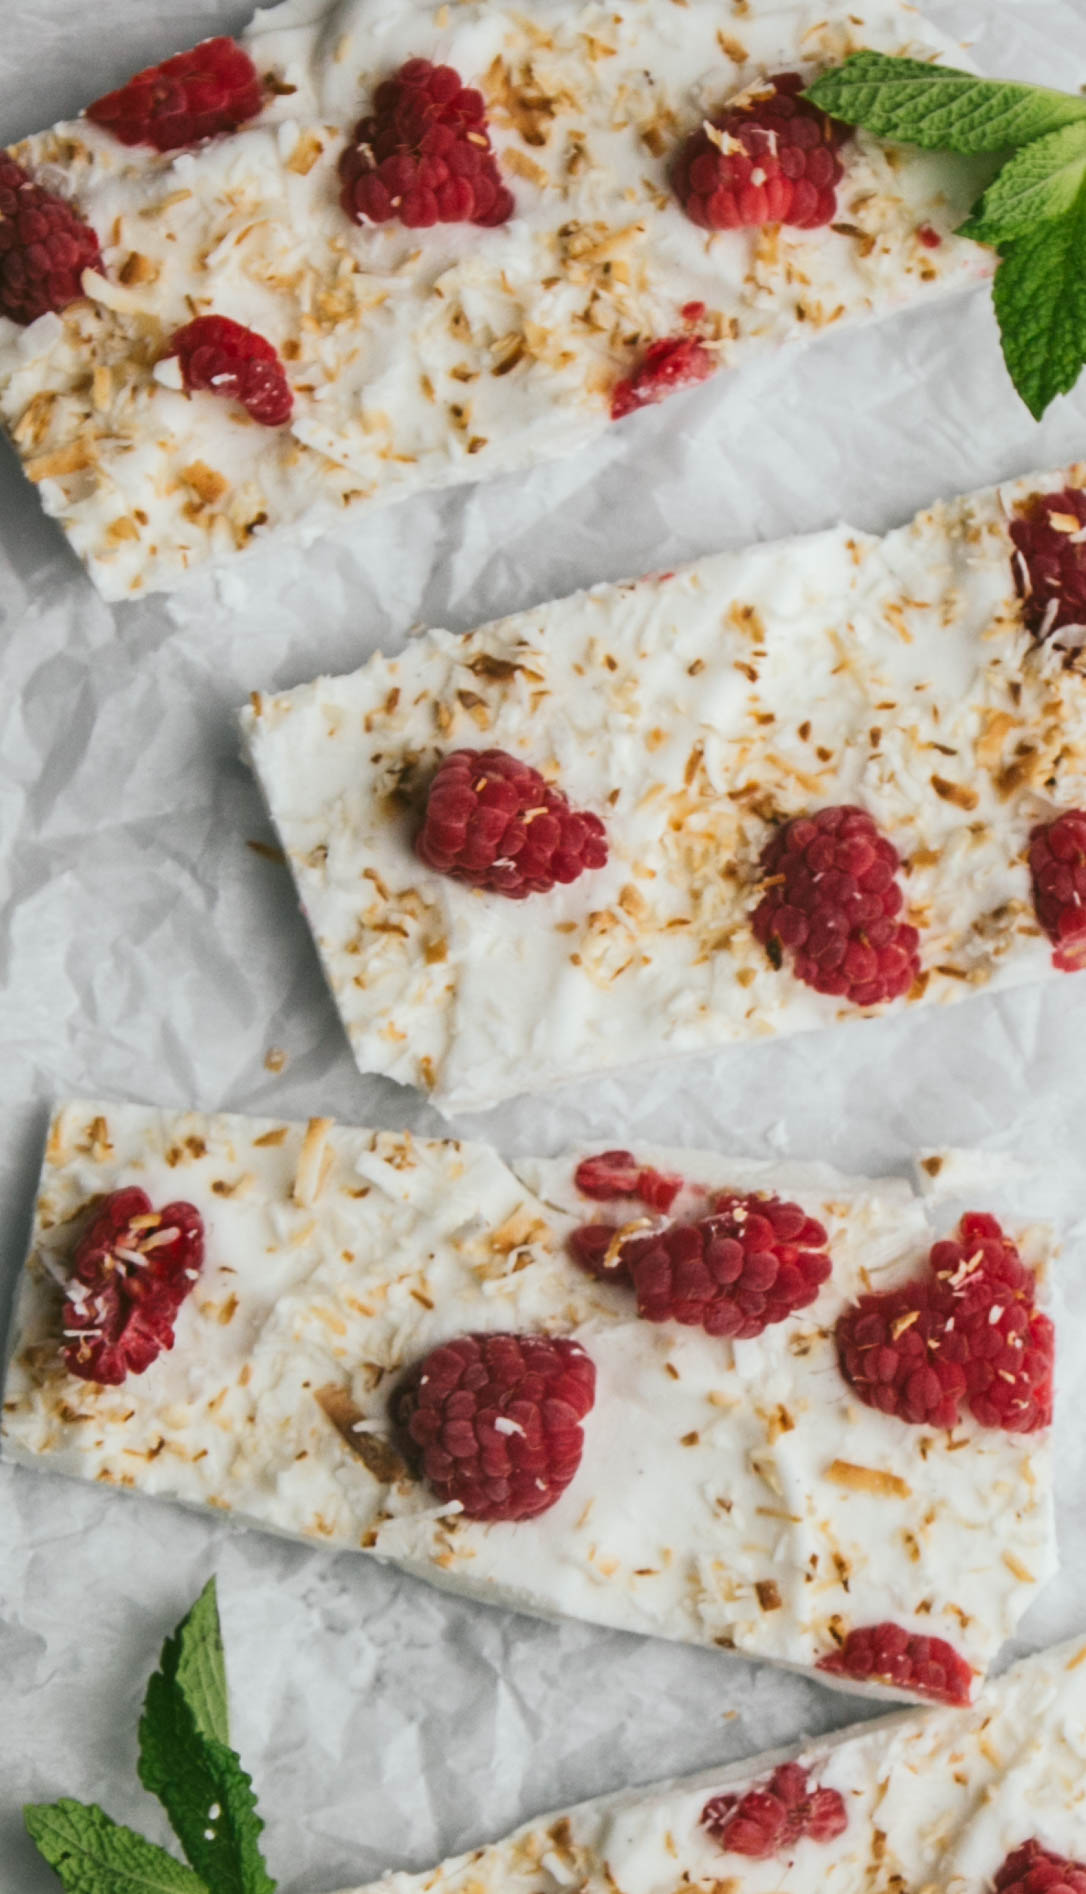 Up close aerial view of frozen yogurt bars with raspberries, toasted coconut and mint leaves